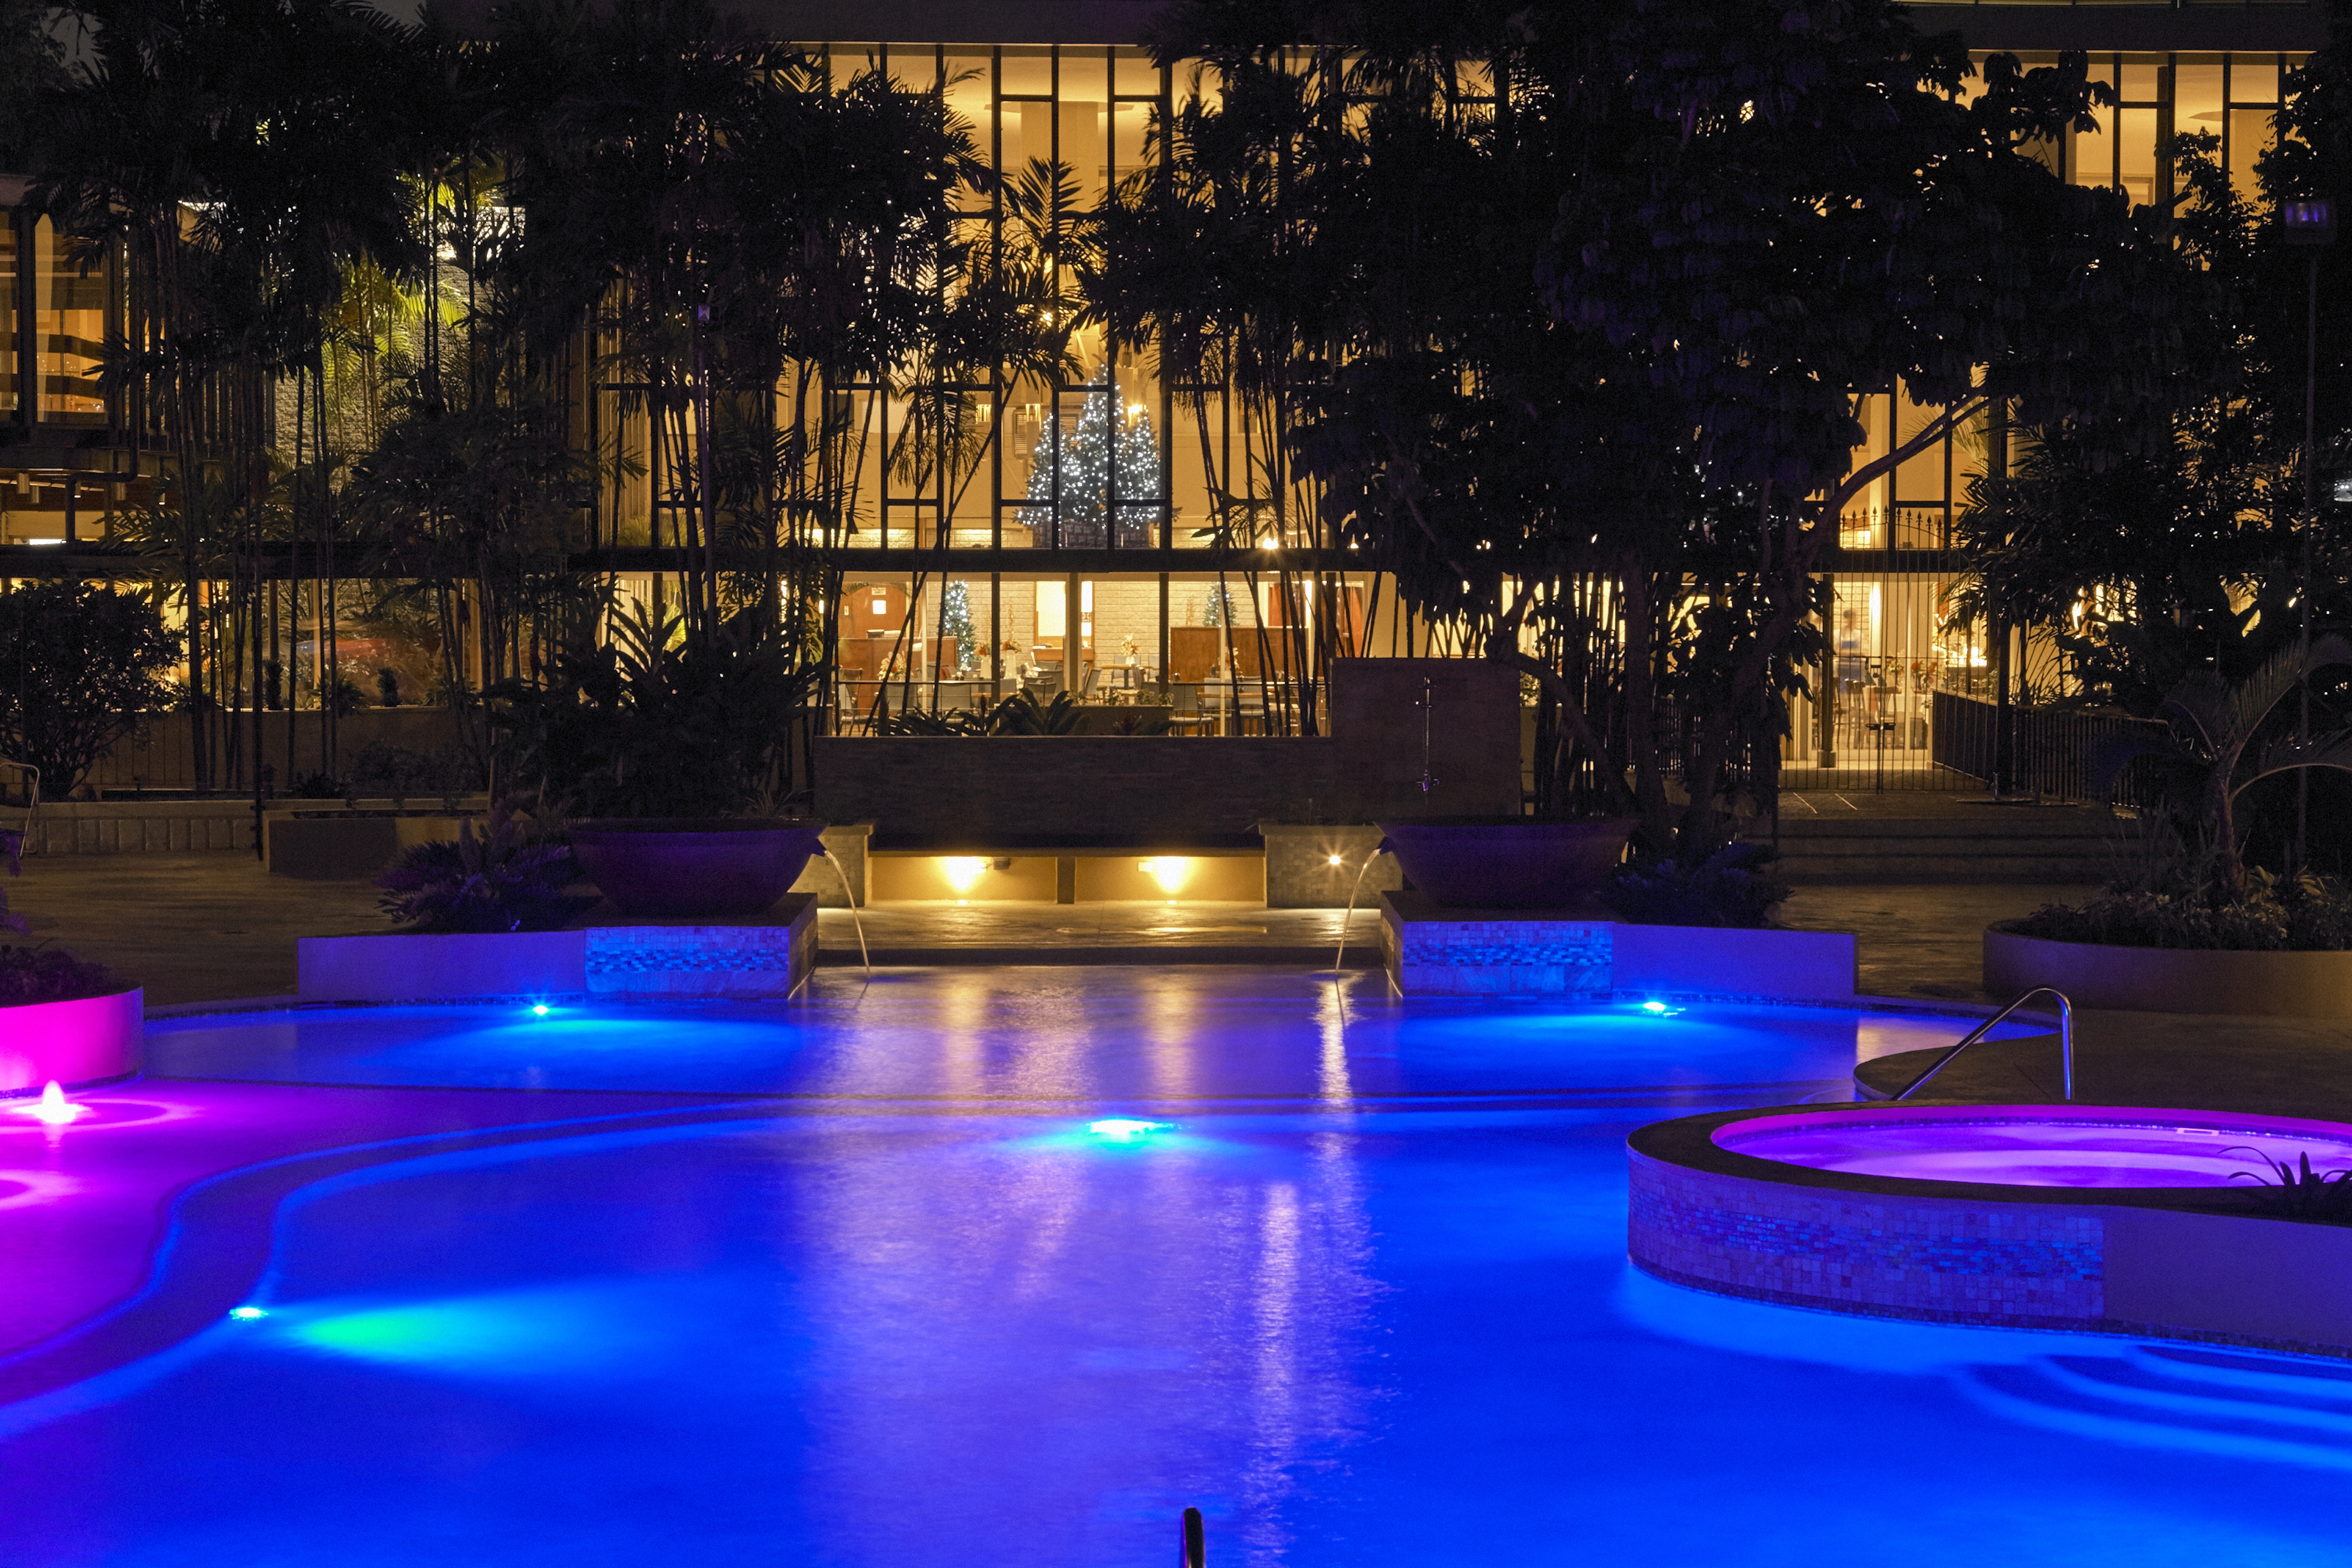 Outdoor Swimming Pool with Sofa at Night